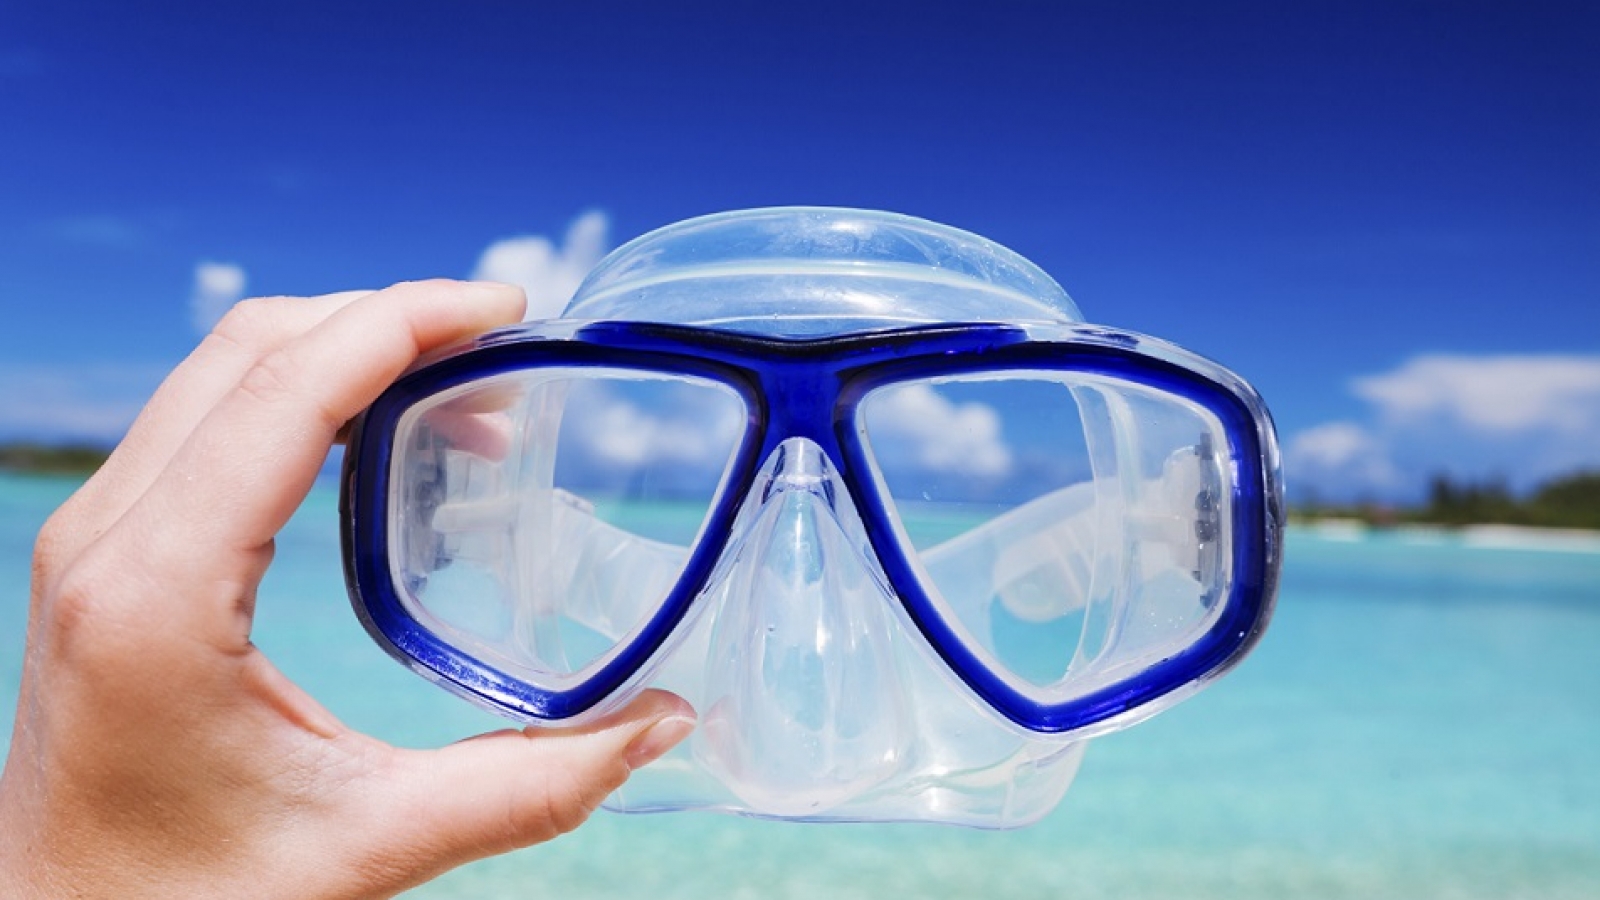 Hand holding snorkel googles against beach and sky